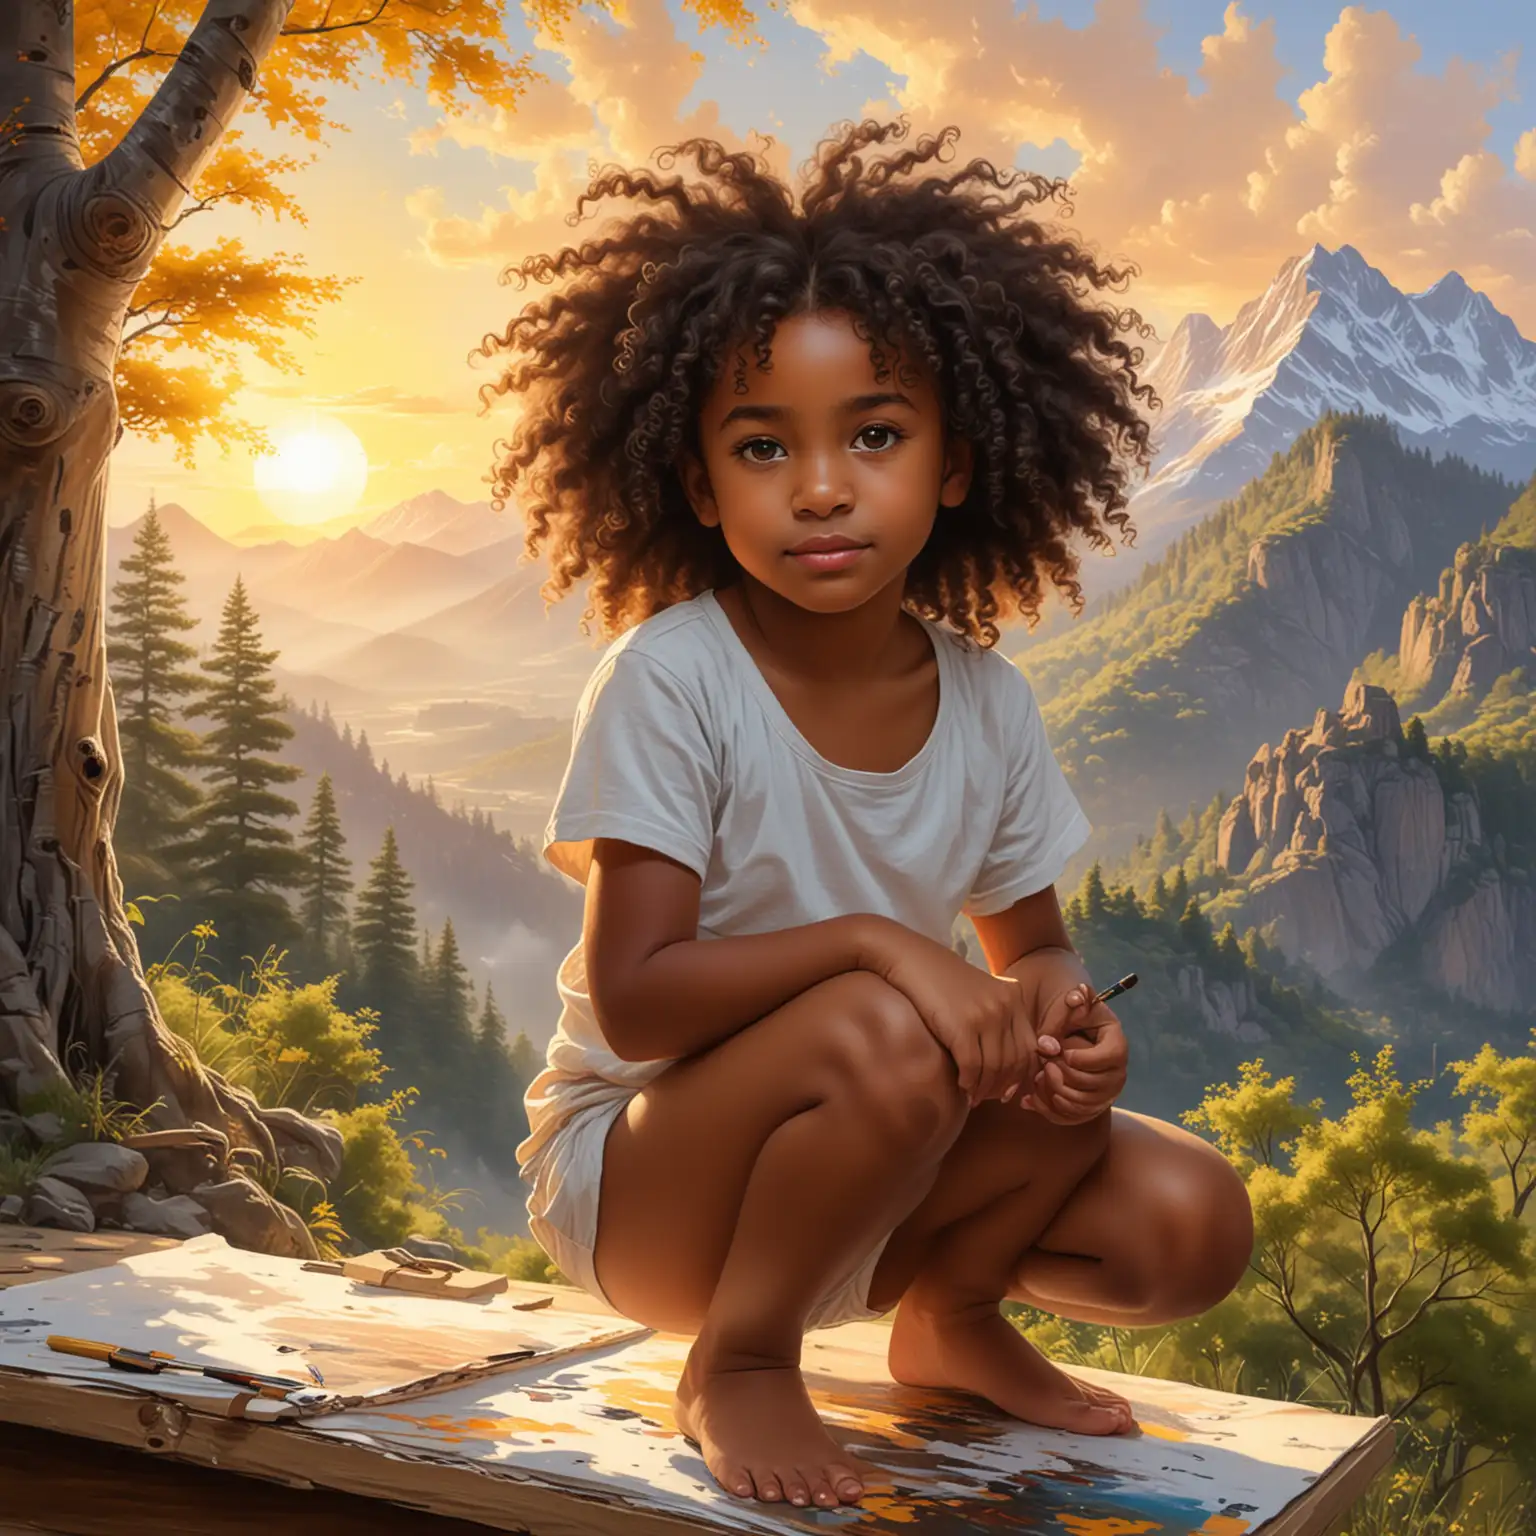 paint  a little black girl with lots of curly natural hair squatting close up in the painting and a beautiful scenic background including trees, mountains and the sun